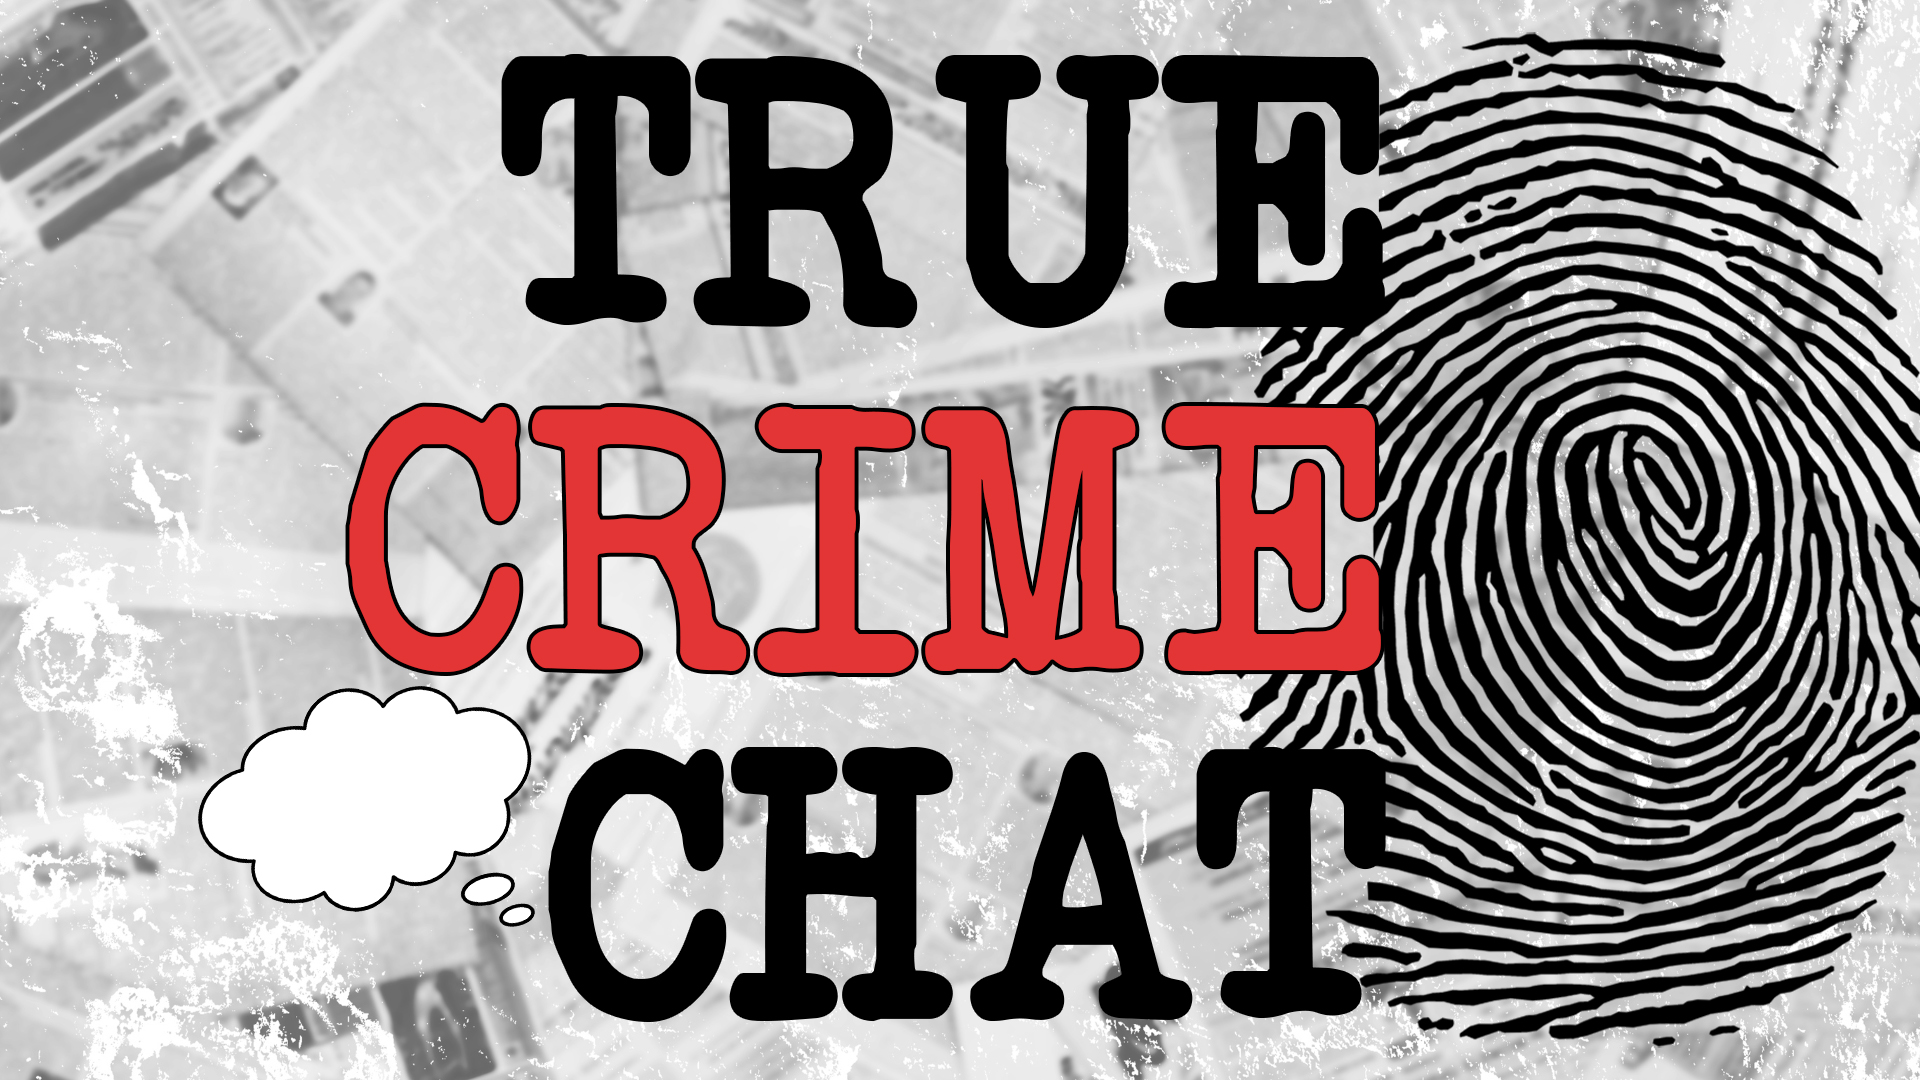 Image reads "True Crime Chat" against a faded newspaper background. A large fingerprint is to the right of the title and a chat bubble is beside the word chat.